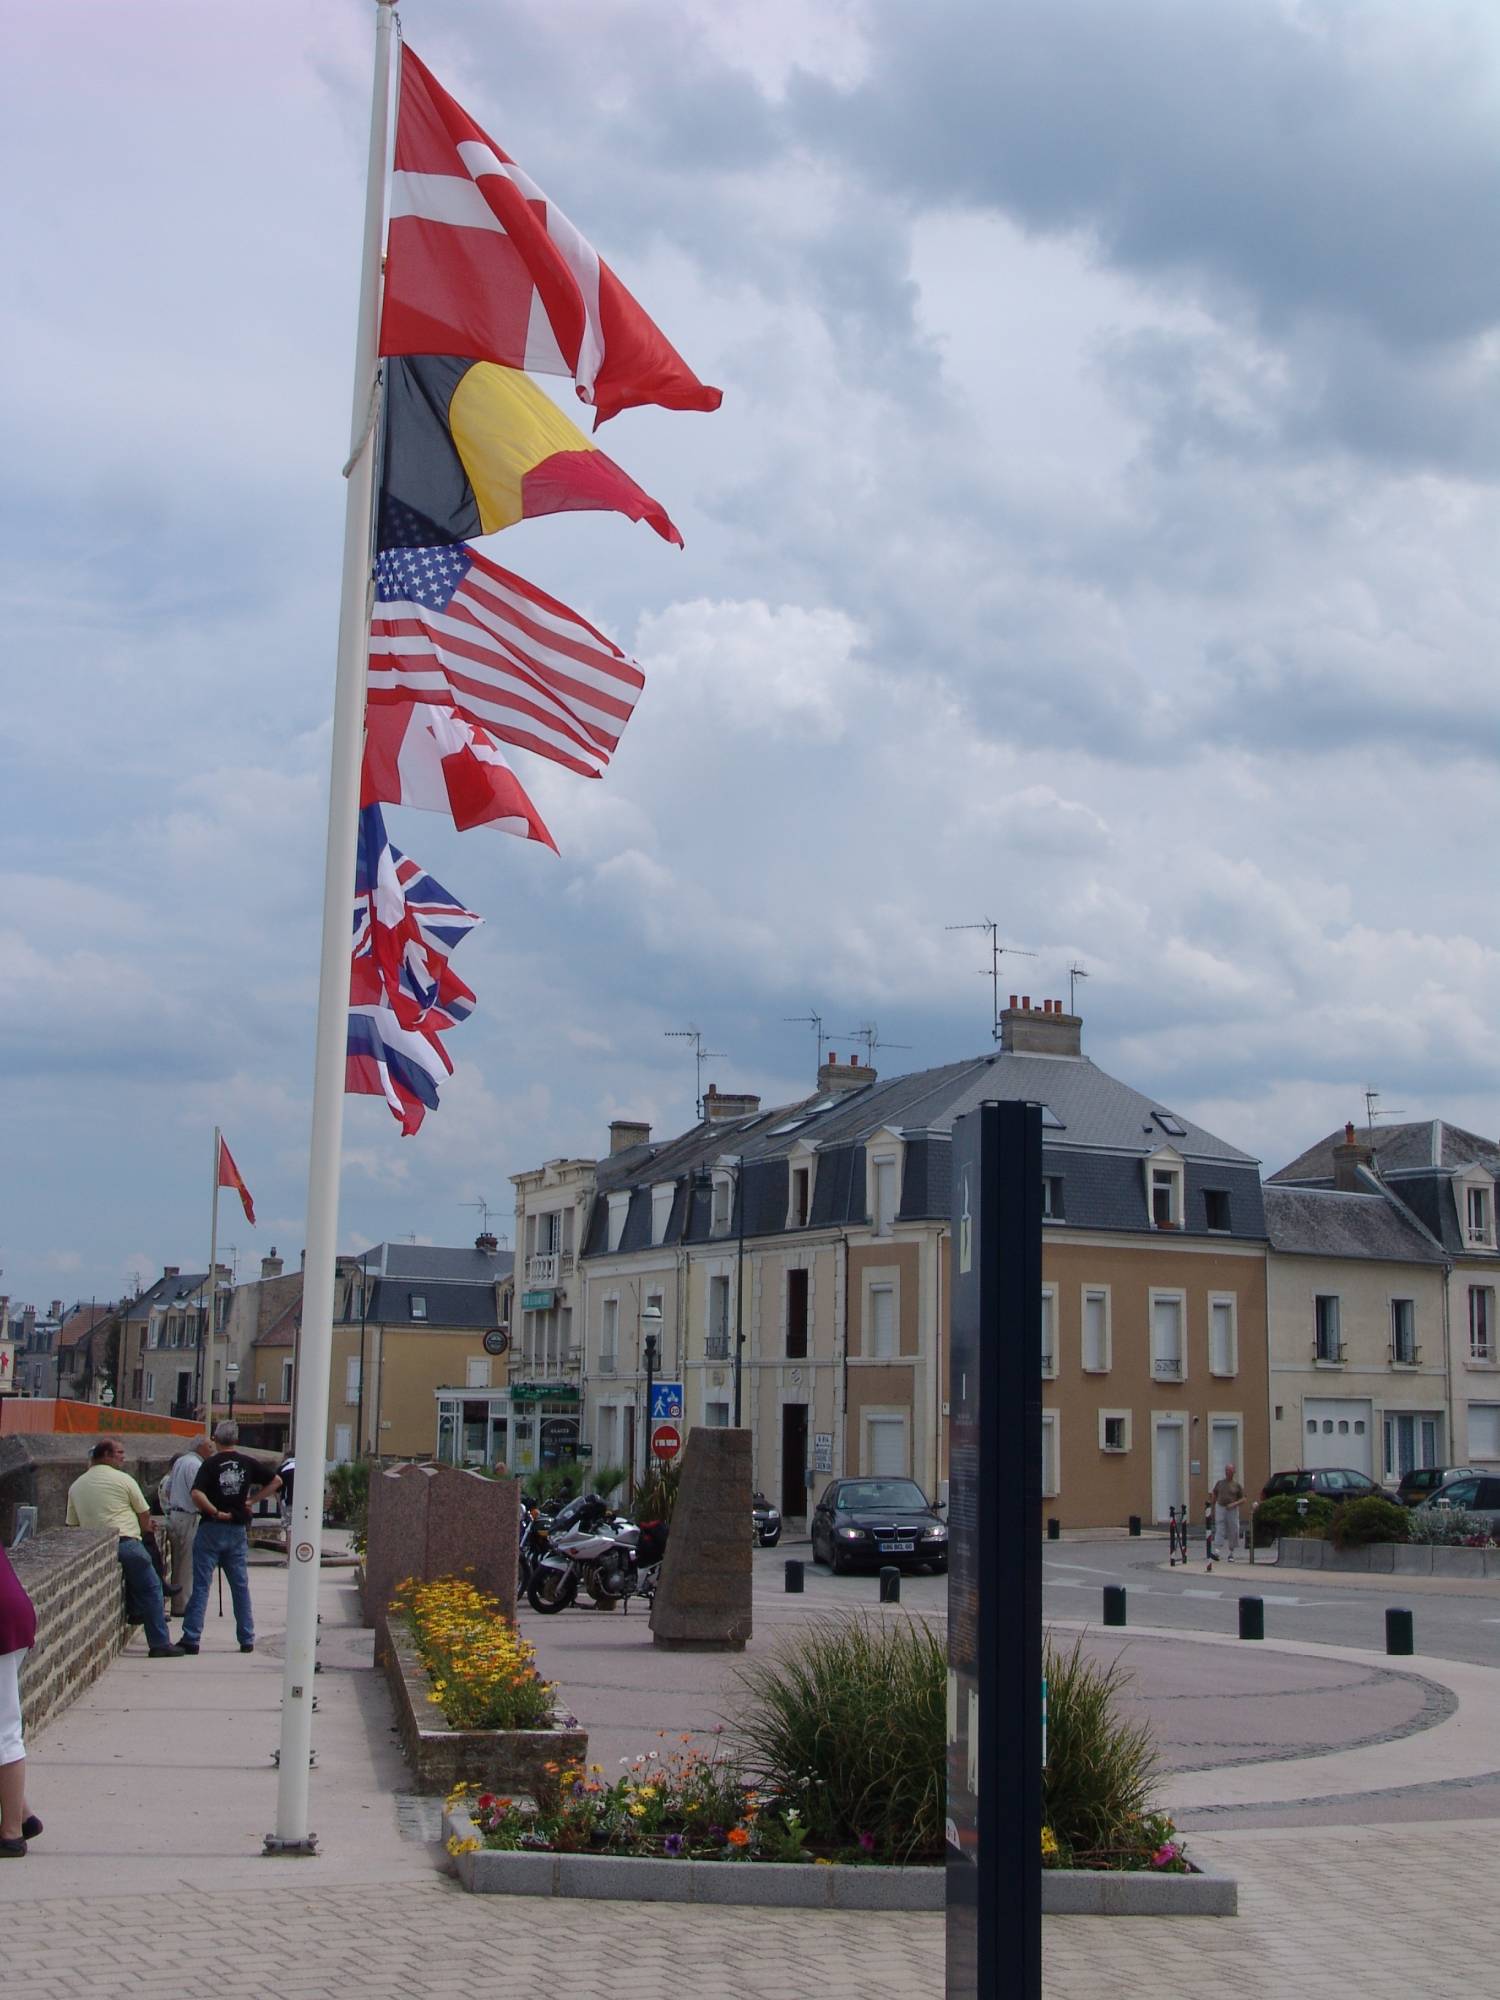 France - Normandy beaches